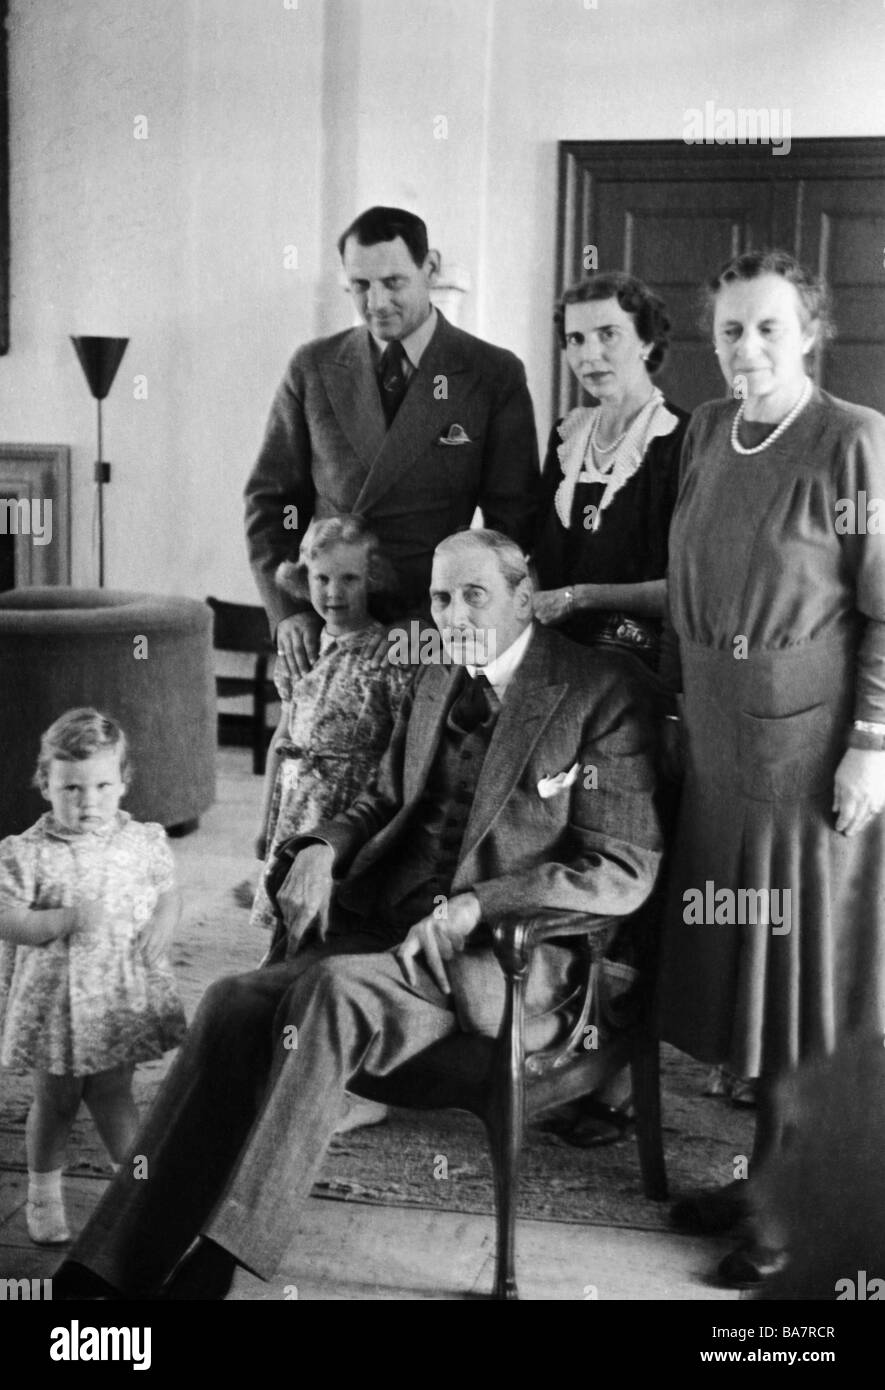 Christian X, 26.9.1870 - 20.4.1947, King of Denmark 1912 - 1947, group picture, with his wife Alexandrine, Crown Prince Frederik, Crown Princess Ingrid and their daughters Margrethe and Benedikte Astrid Ingeborg Ingrid, 1946 / 1947, Stock Photo